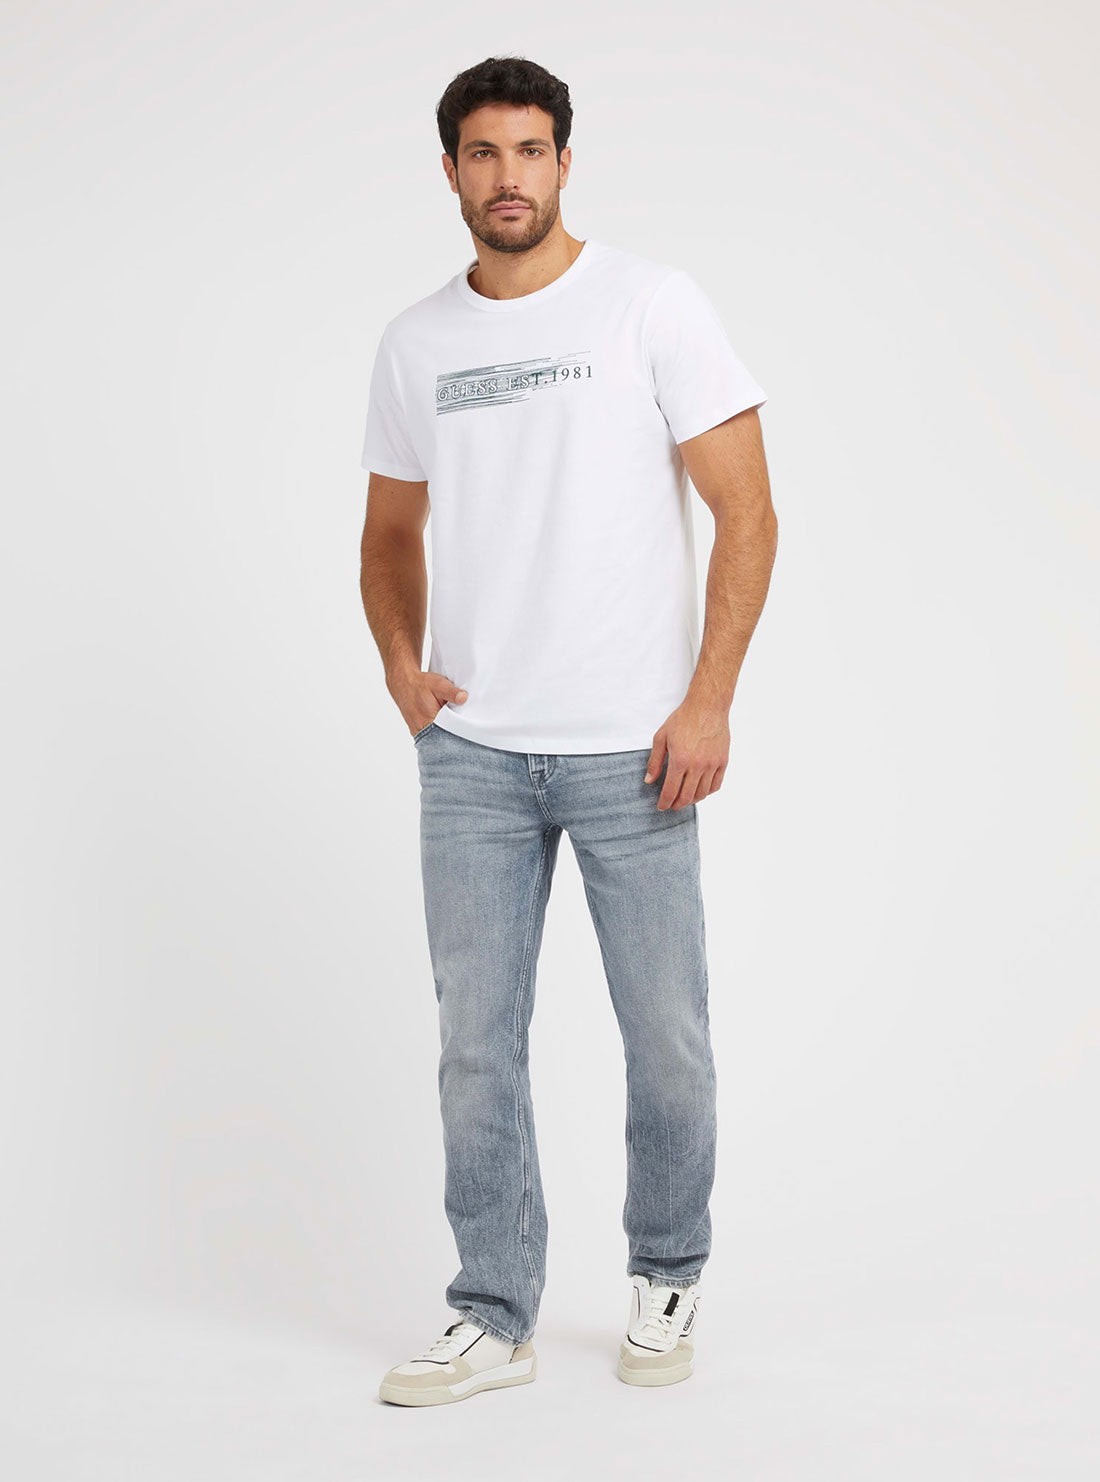 White Logo Embroidered T-Shirt | GUESS Men's | Full view